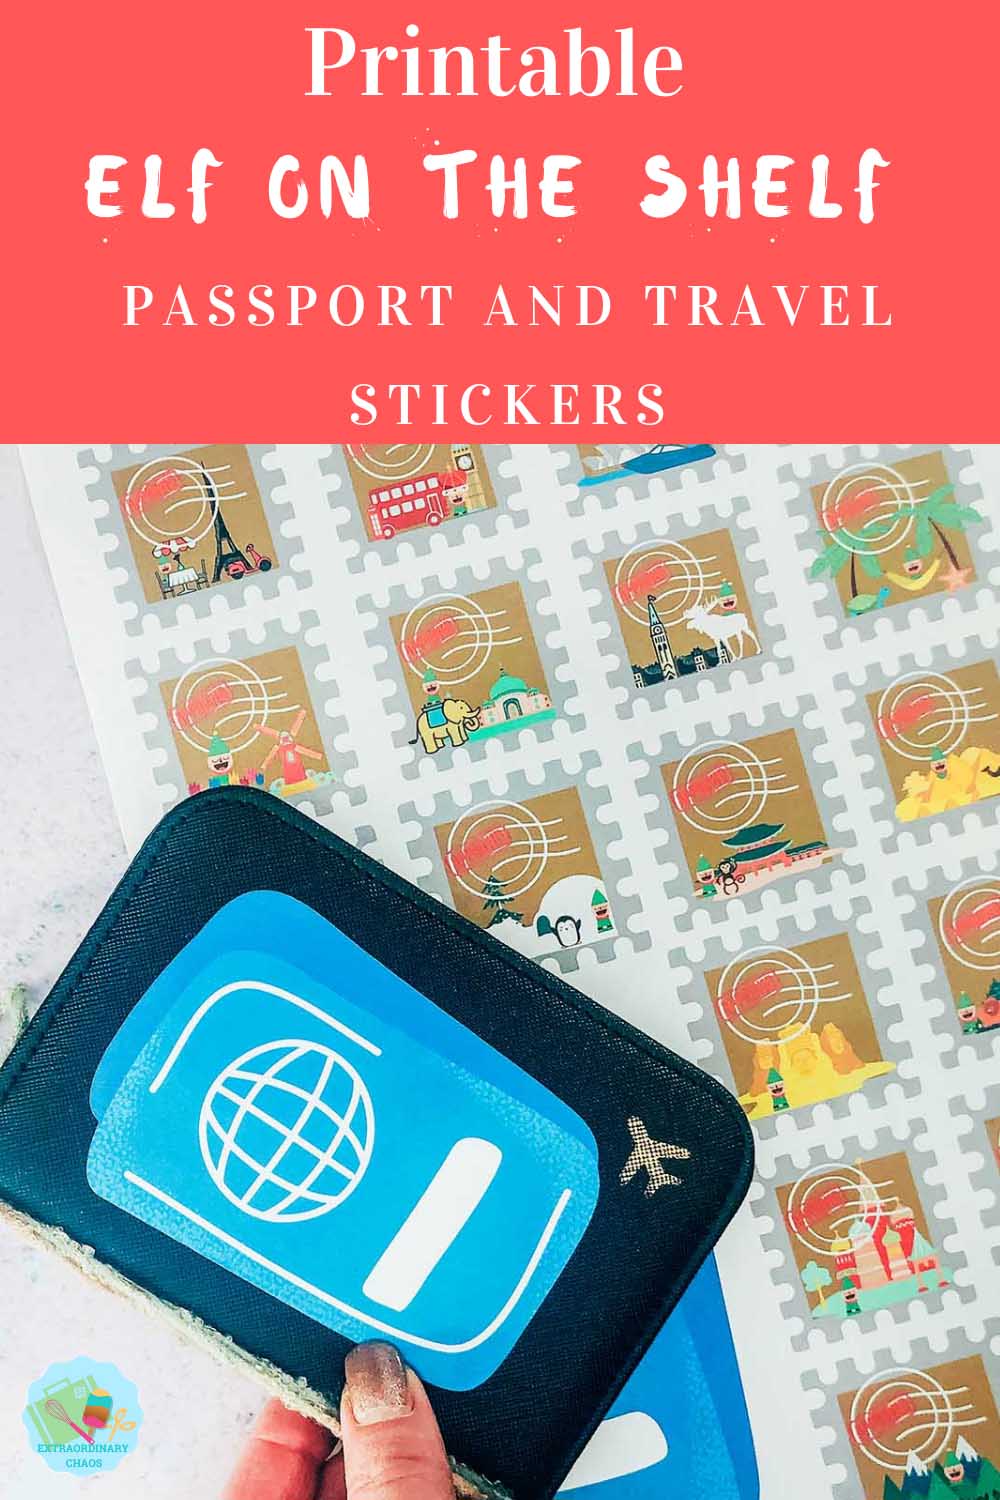 Free Printable Elf on the shelf passport and travel stickers download